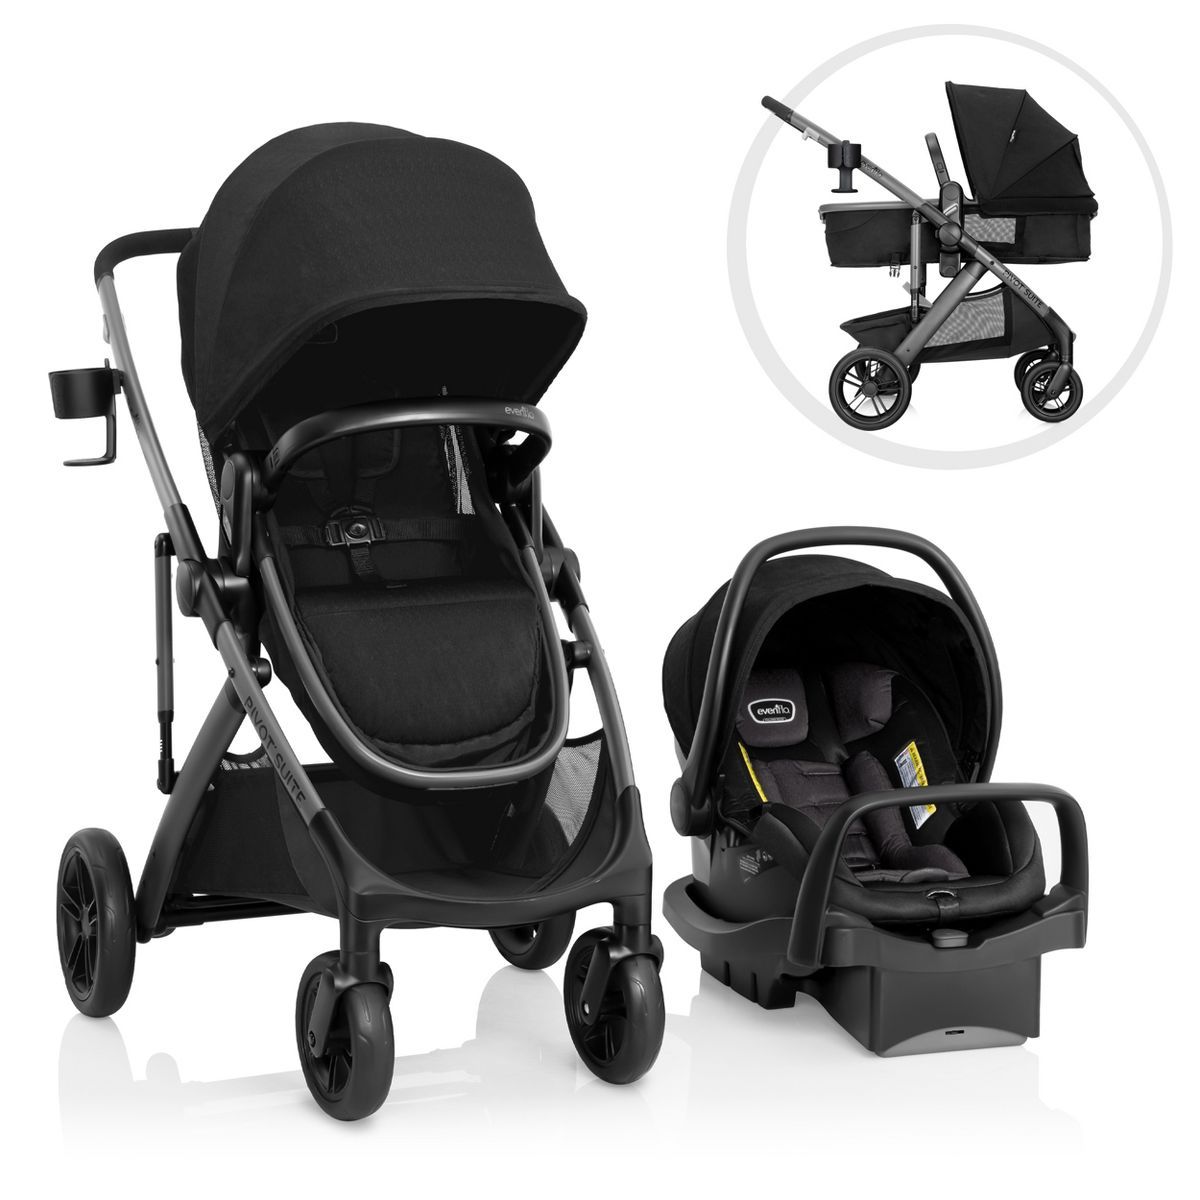 Evenflo Pivot Suite Travel System with LiteMax | Target